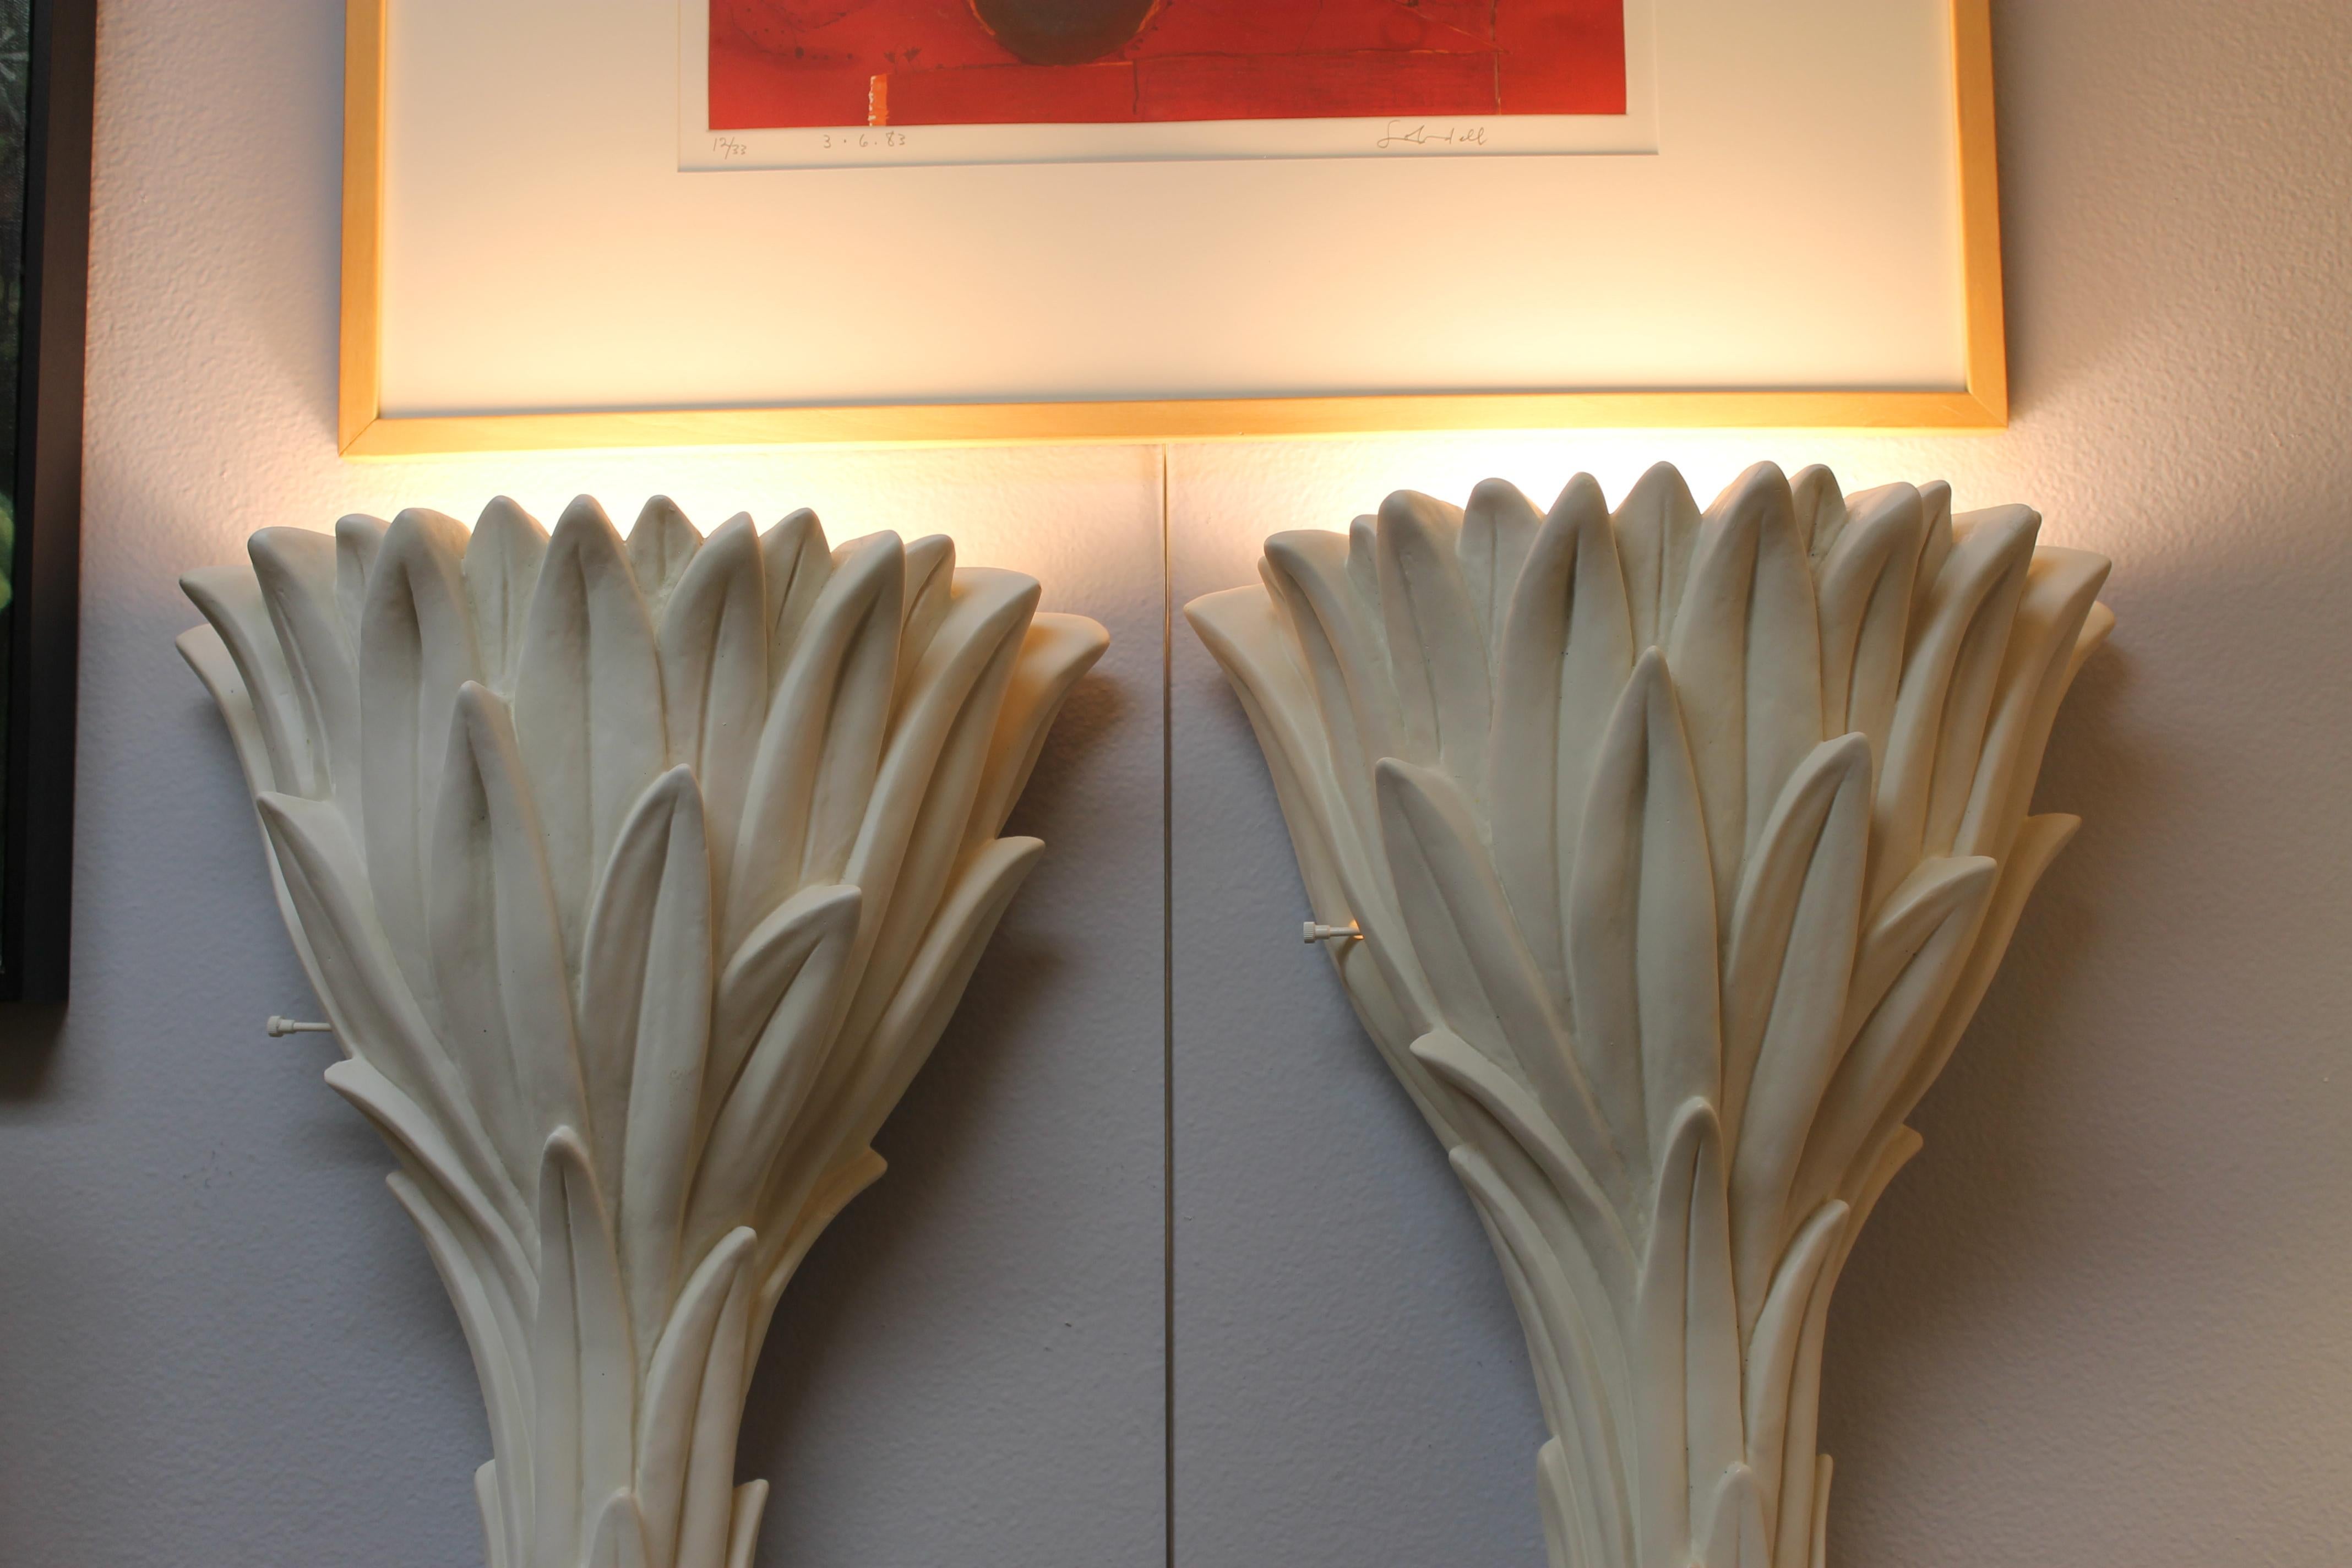 Pair of plaster foliate torcheres by Serge Roche. These pair are the rare wall-mounted versions. Frances/Francis Elkins along with other interior designers used these when furnishing their interiors. They measure 18